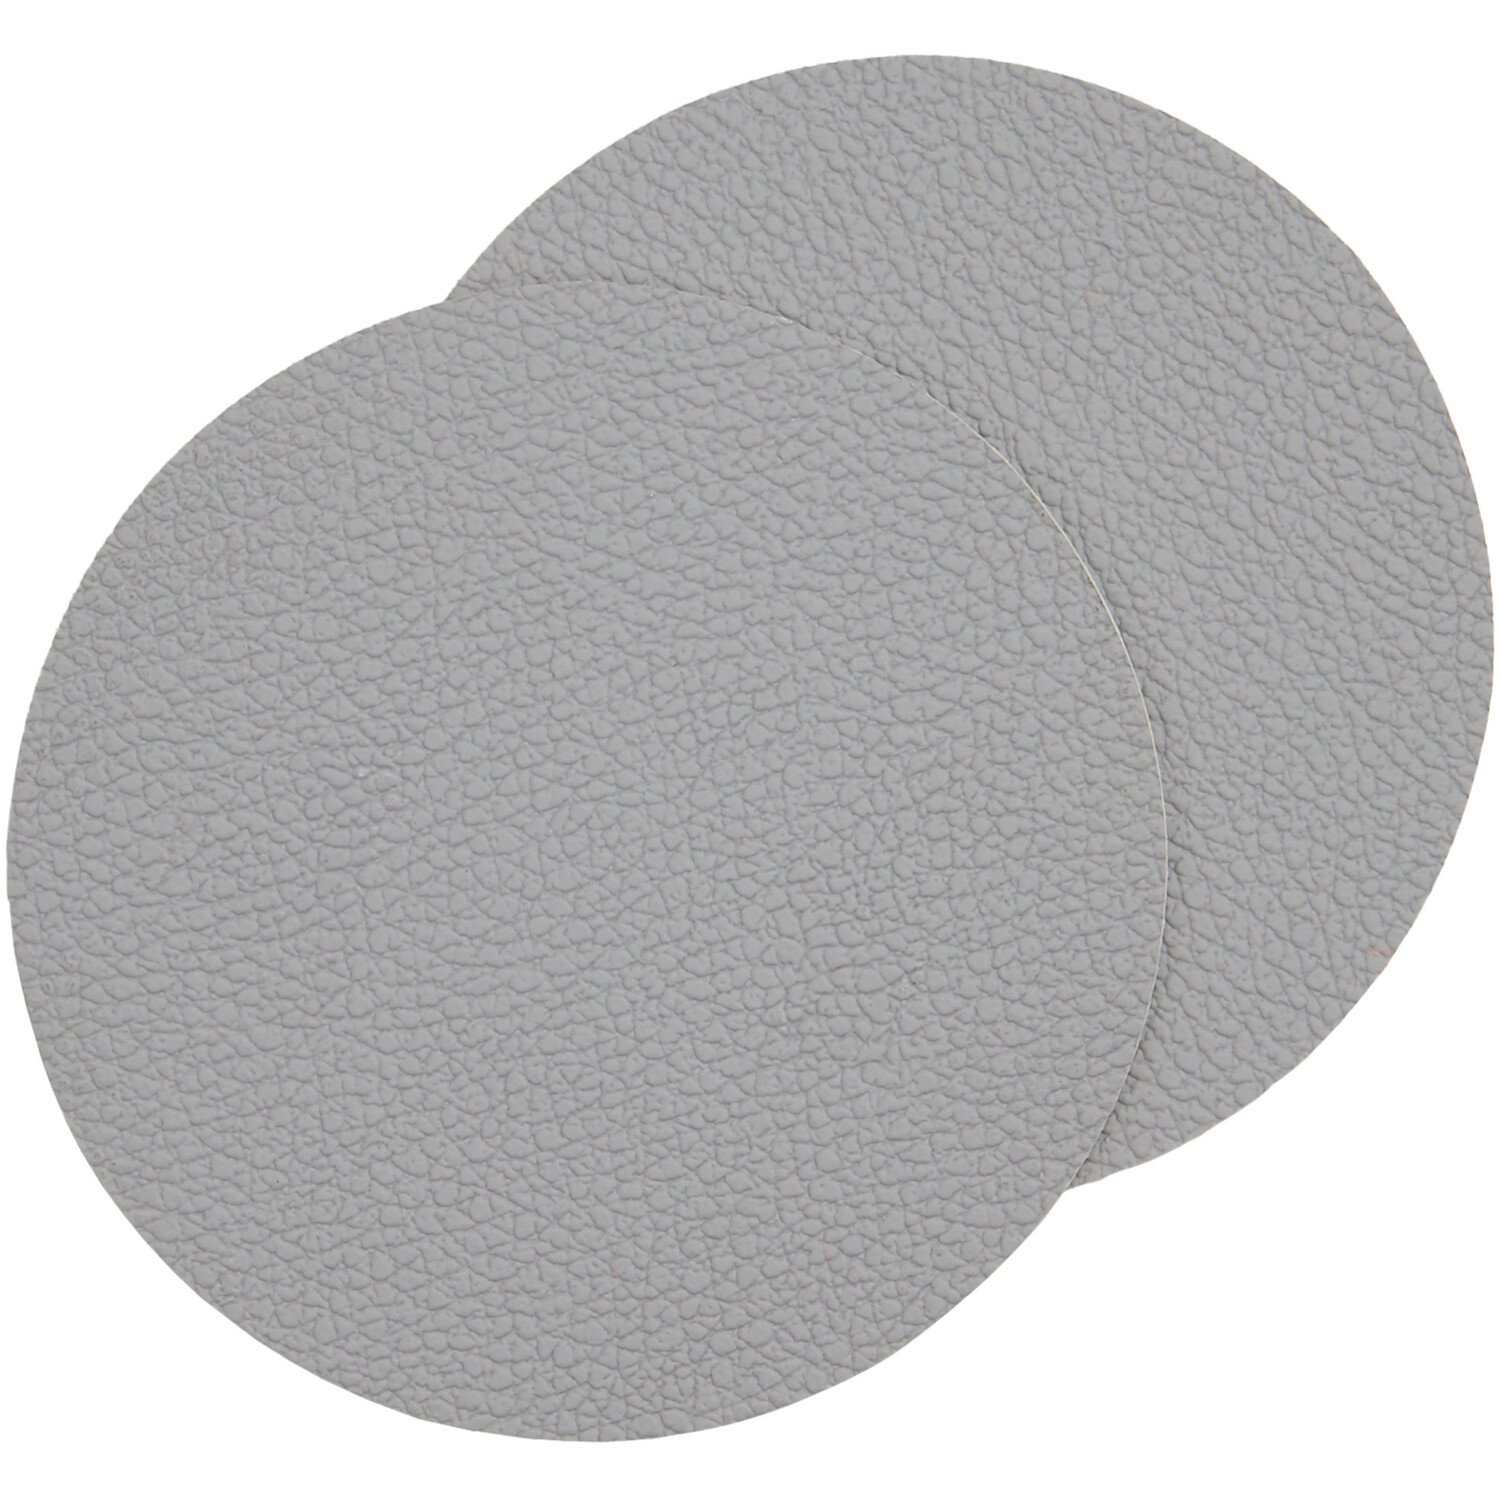 Set of 4 Round Fusion Faux Leather Coasters - Grey Image 3